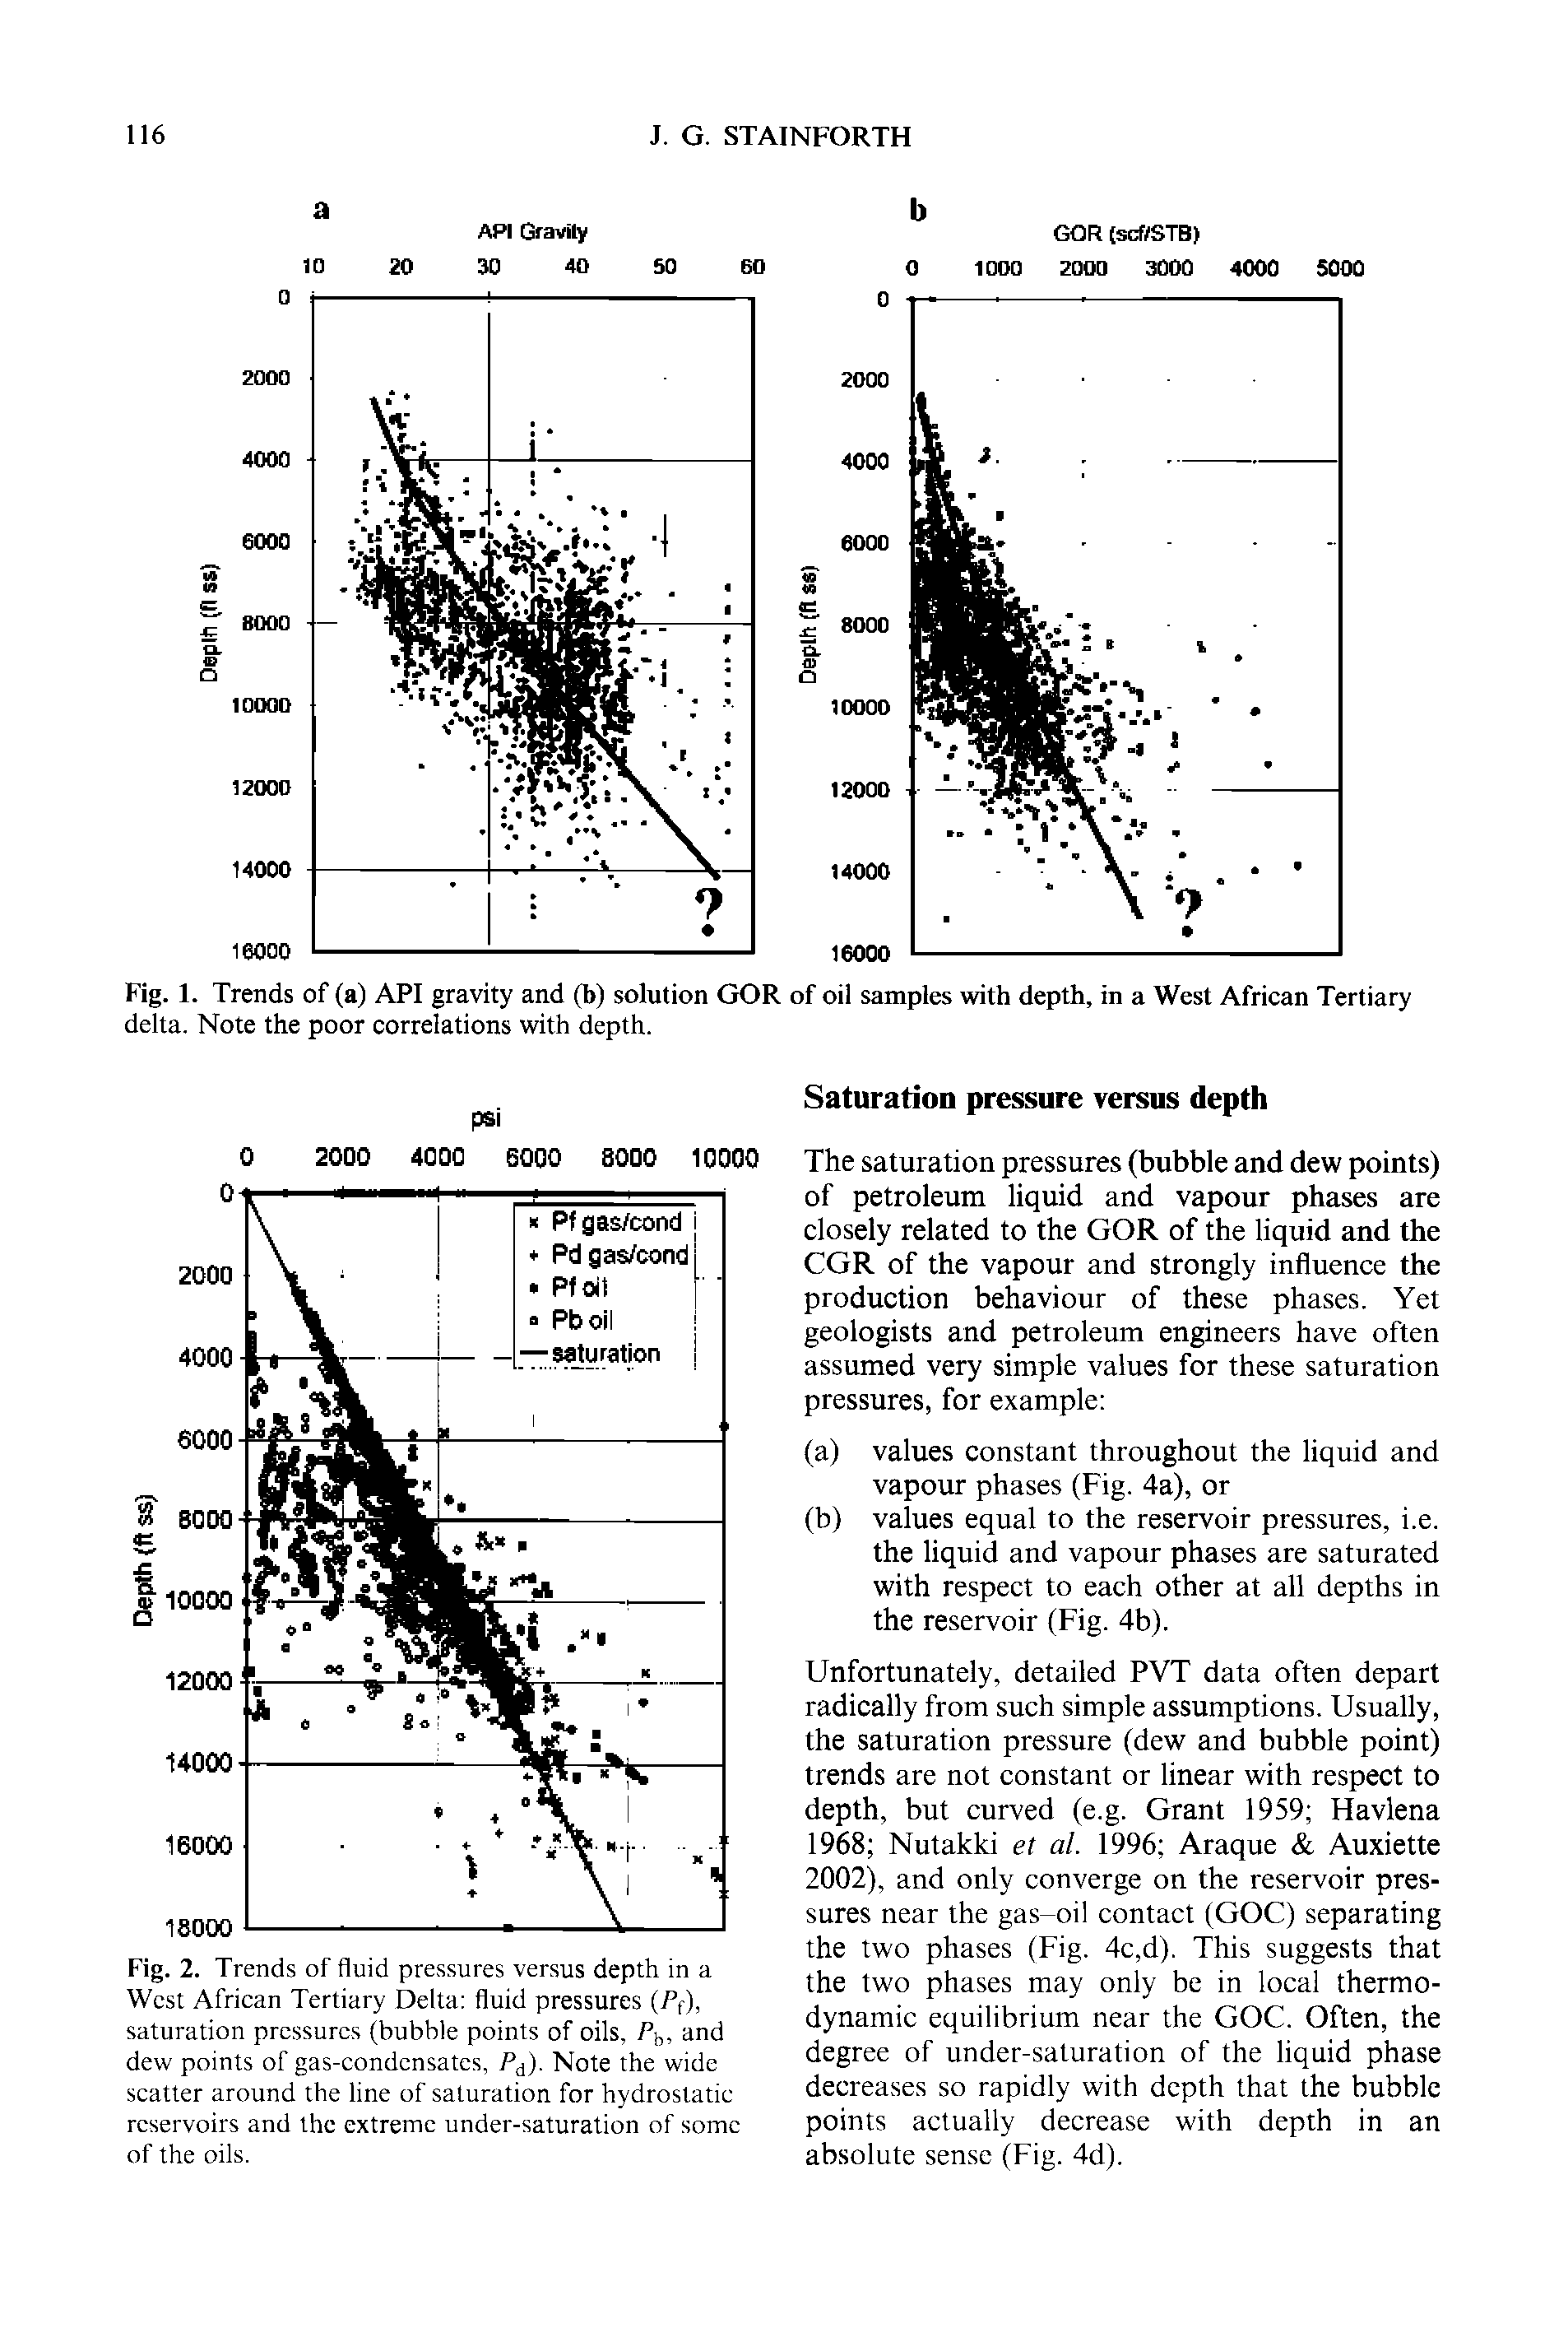 Fig. 2. Trends of fluid pressures versus depth in a West African Tertiary Delta fluid pressures (Pf), saturation pressures (bubble points of oils, Pi, and dew points of gas-condensates, P ). Note the wide scatter around the line of saturation for hydrostatic reservoirs and the extreme under-saturation of some of the oils.